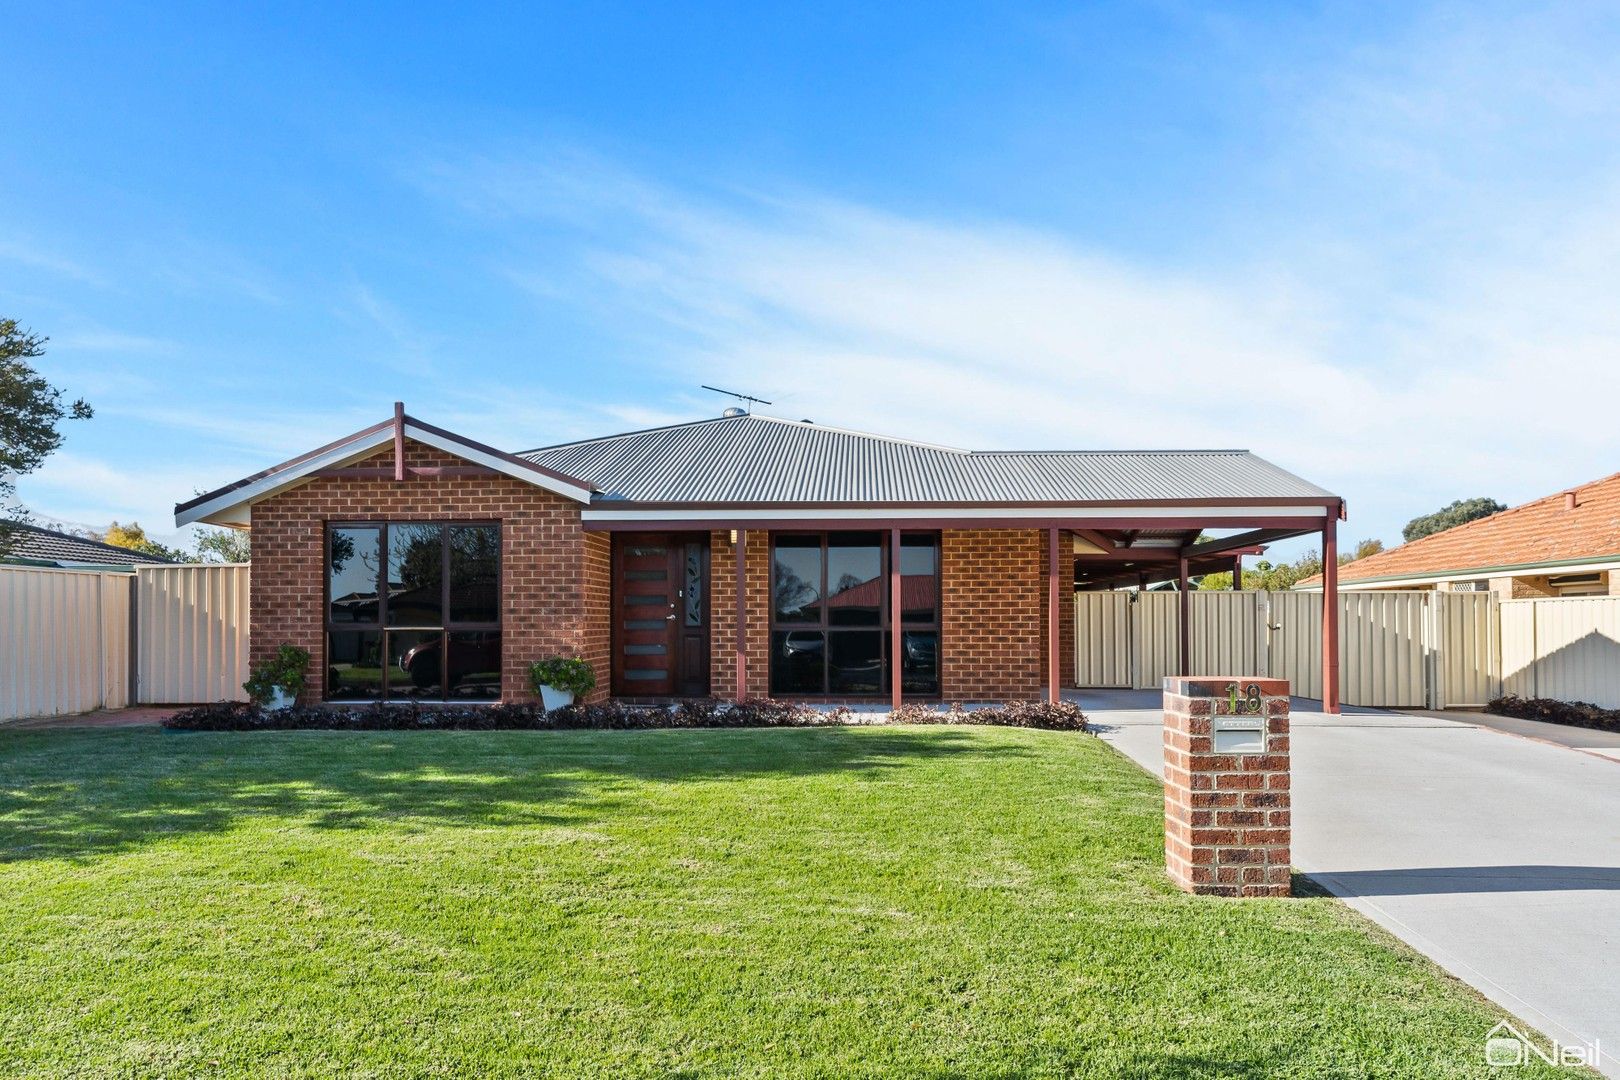 4 bedrooms House in 18 Chisholm Circle SEVILLE GROVE WA, 6112